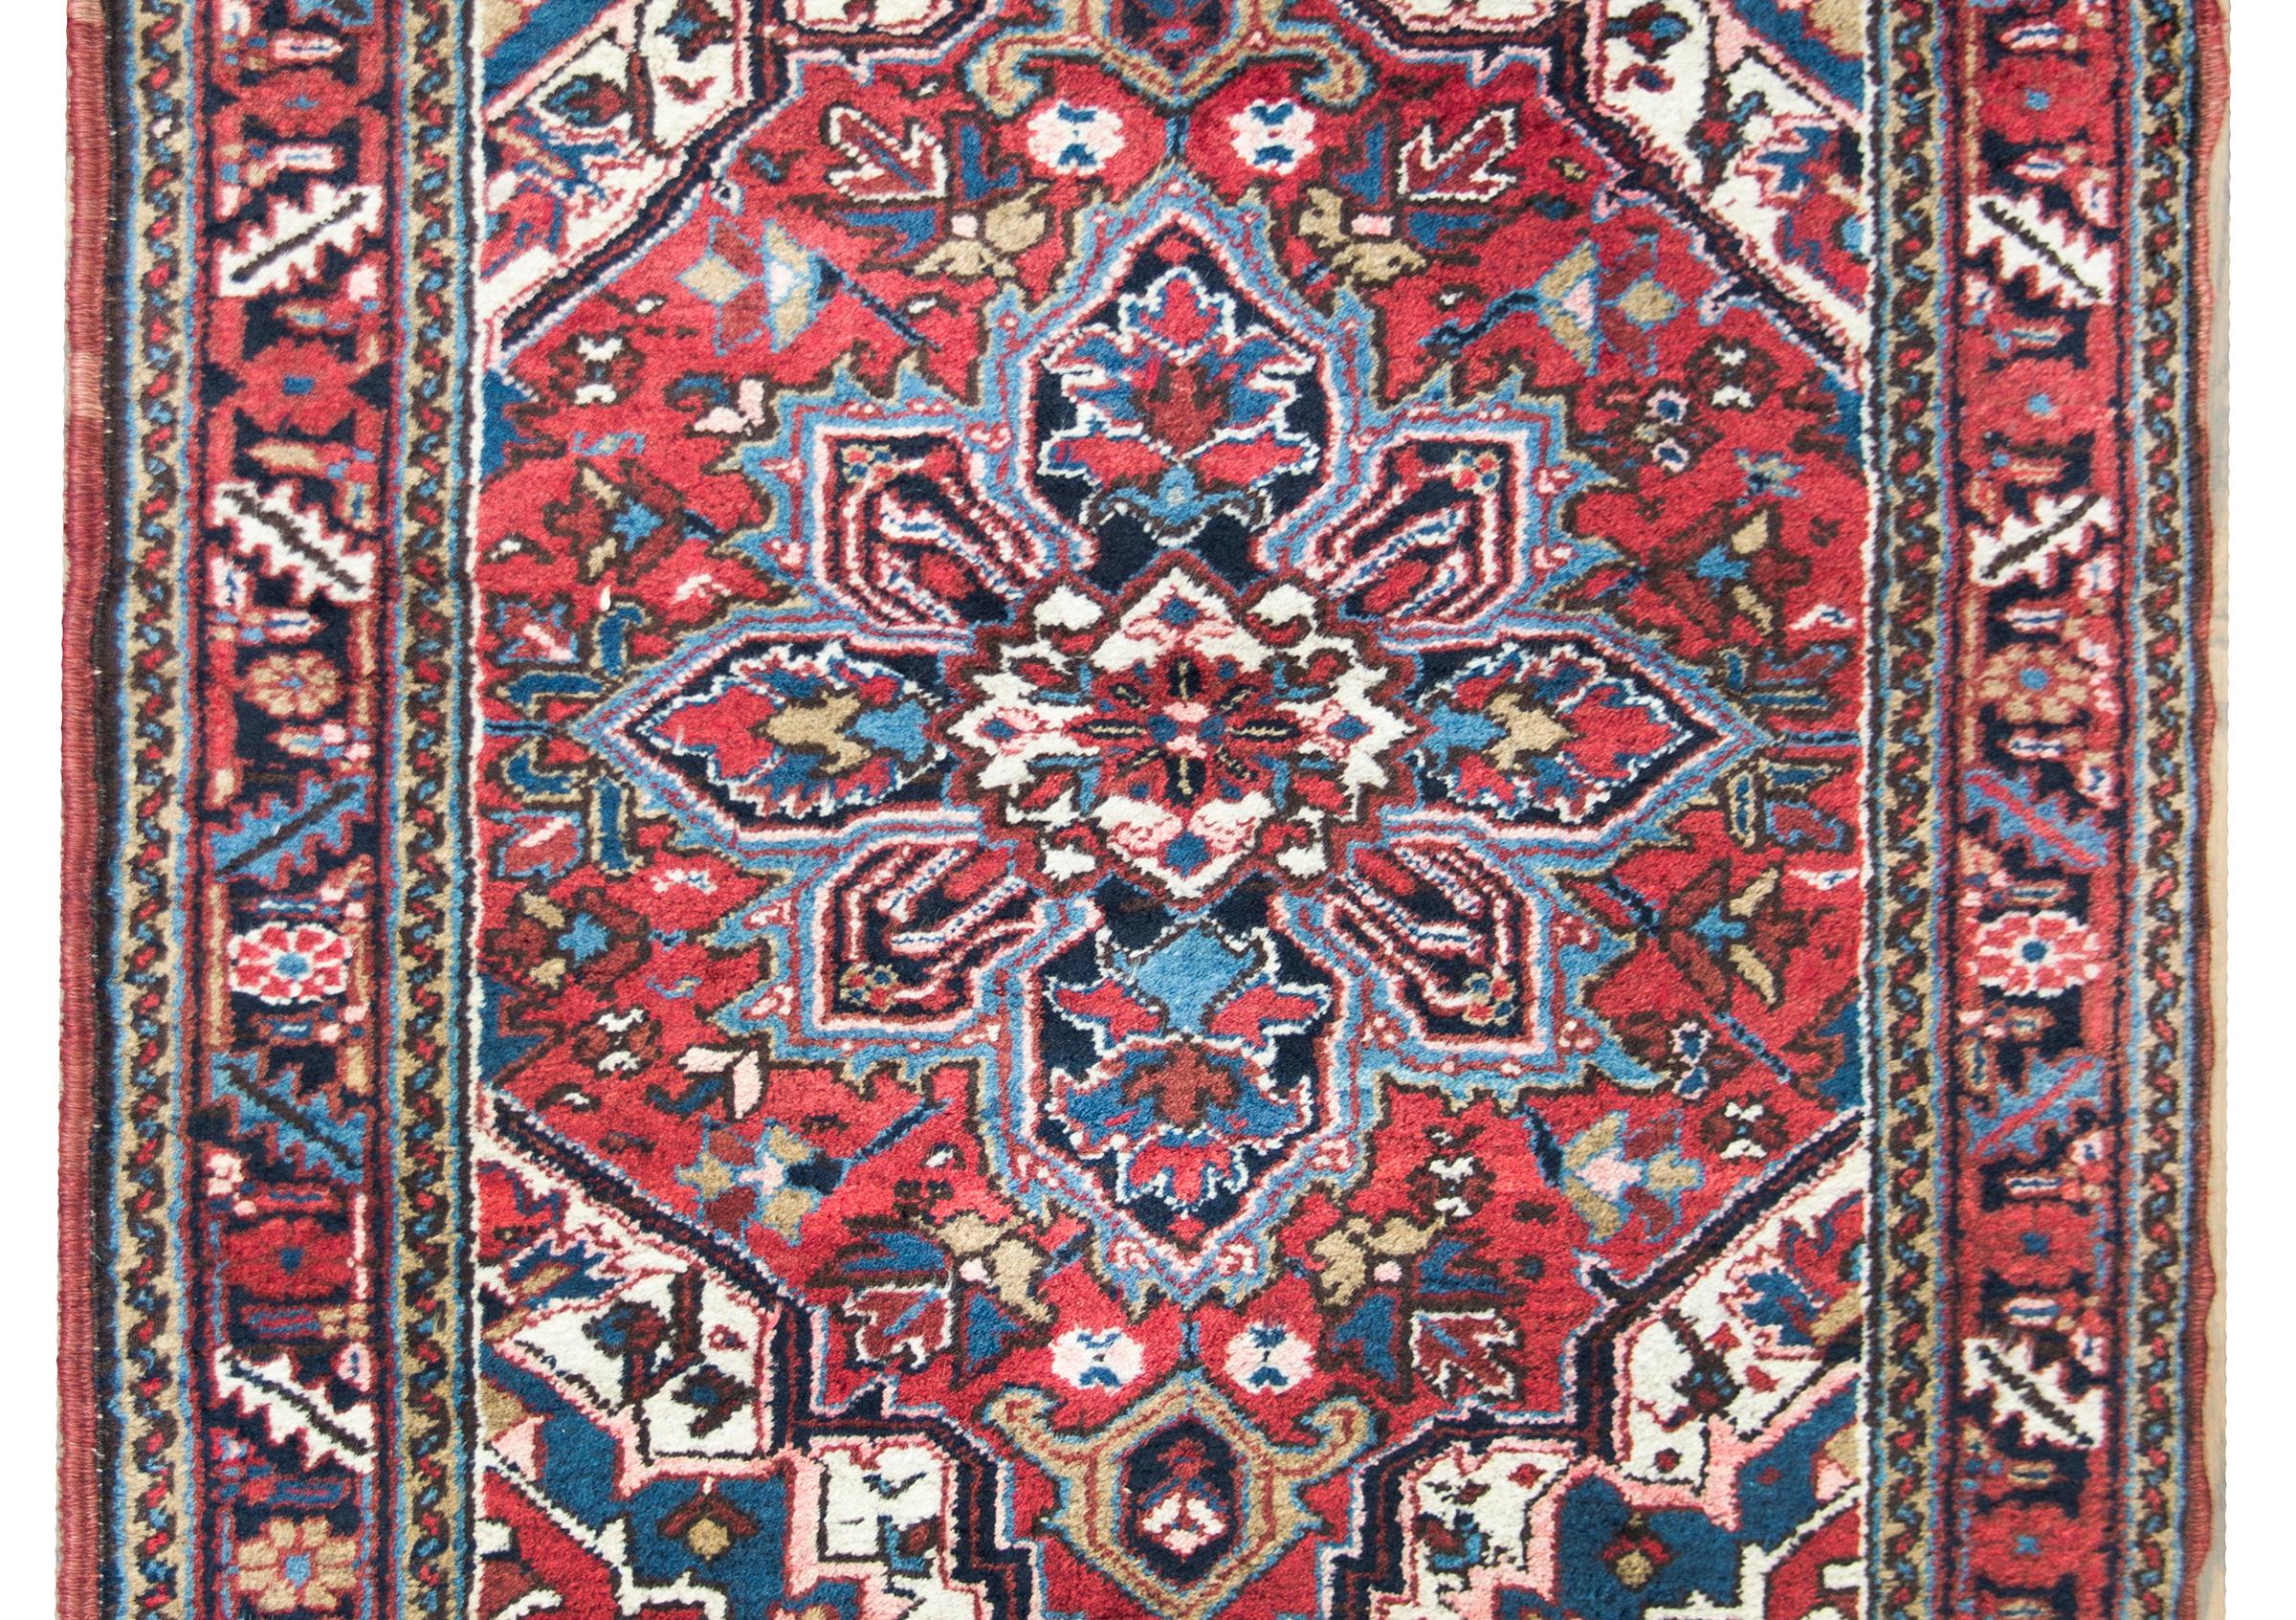 A beautiful early 20th century Persian Heriz rug with a traditional large central floral medallion living amidst a field of more flowers and leaves, surrounded by a repeated leaf and floral pattern, and all woven in crimson, light and dark indigo,